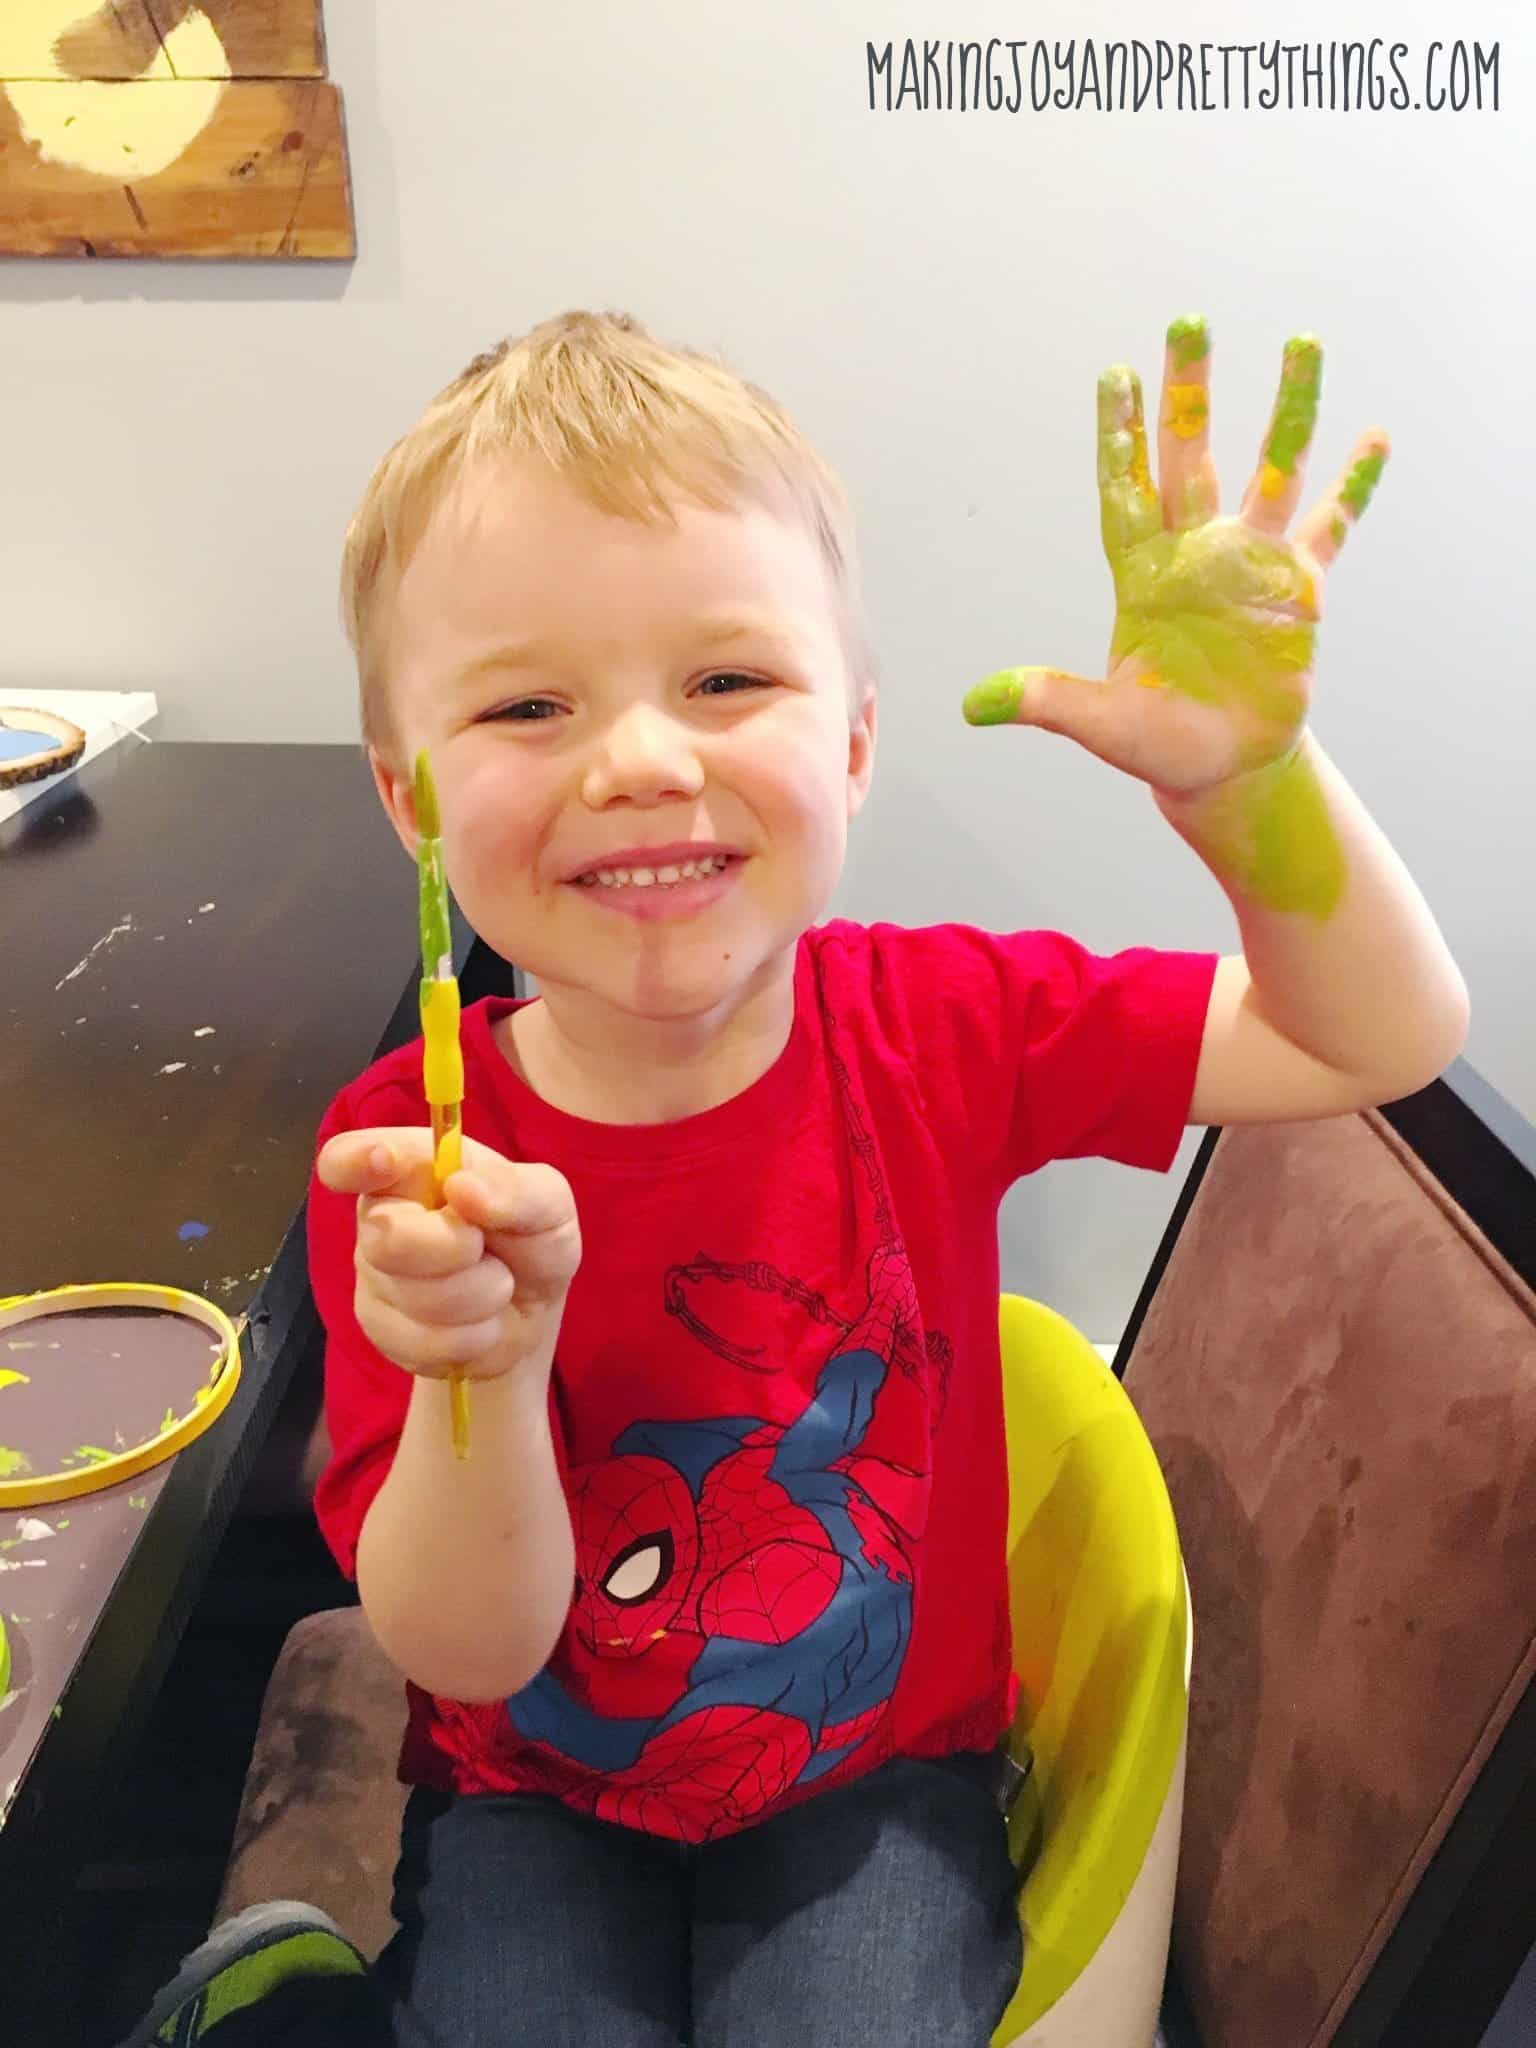 A little boy in a red shirt proudly smiles, holding up his green and yellow paint-covered hand and paint brush while making pressed flower suncatchers.